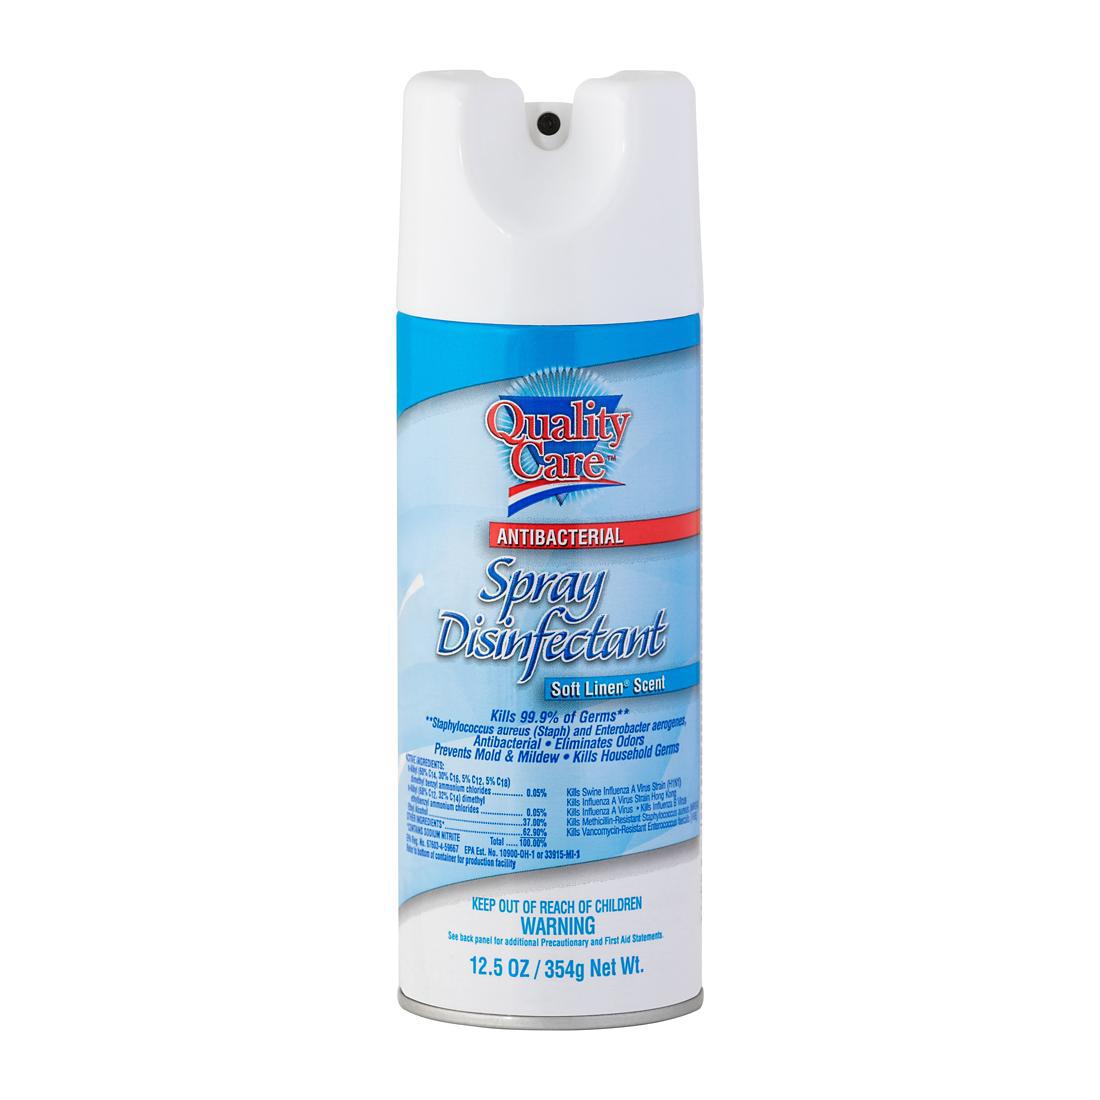 Quality Care Spray Disinfectant, Soft Linen Scent